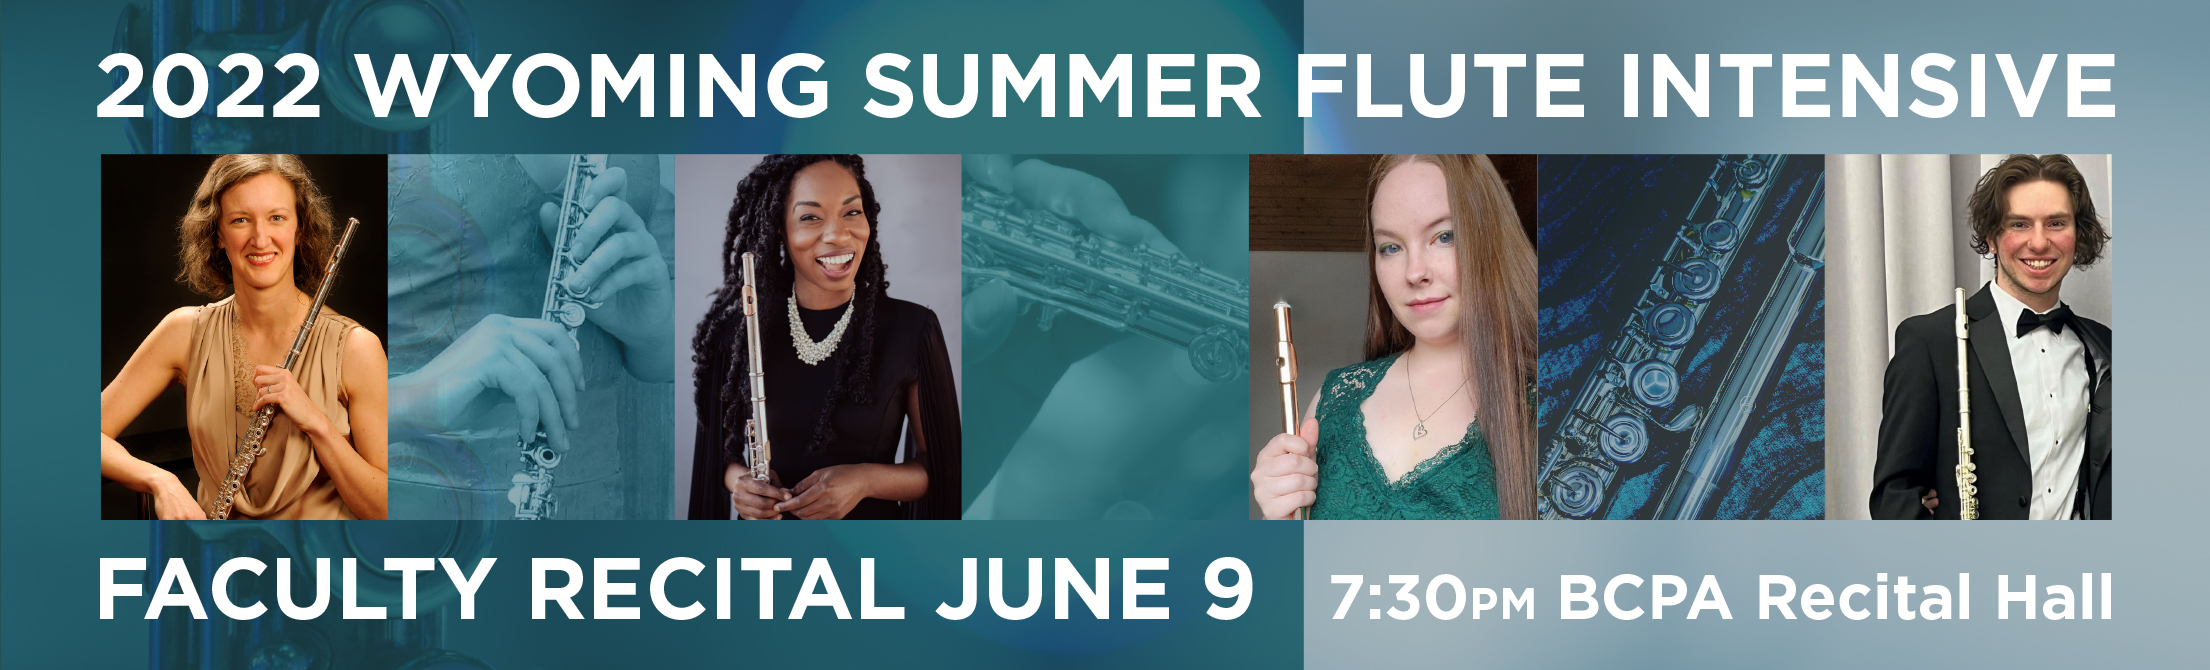 Wyoming Summer Flute Intensive